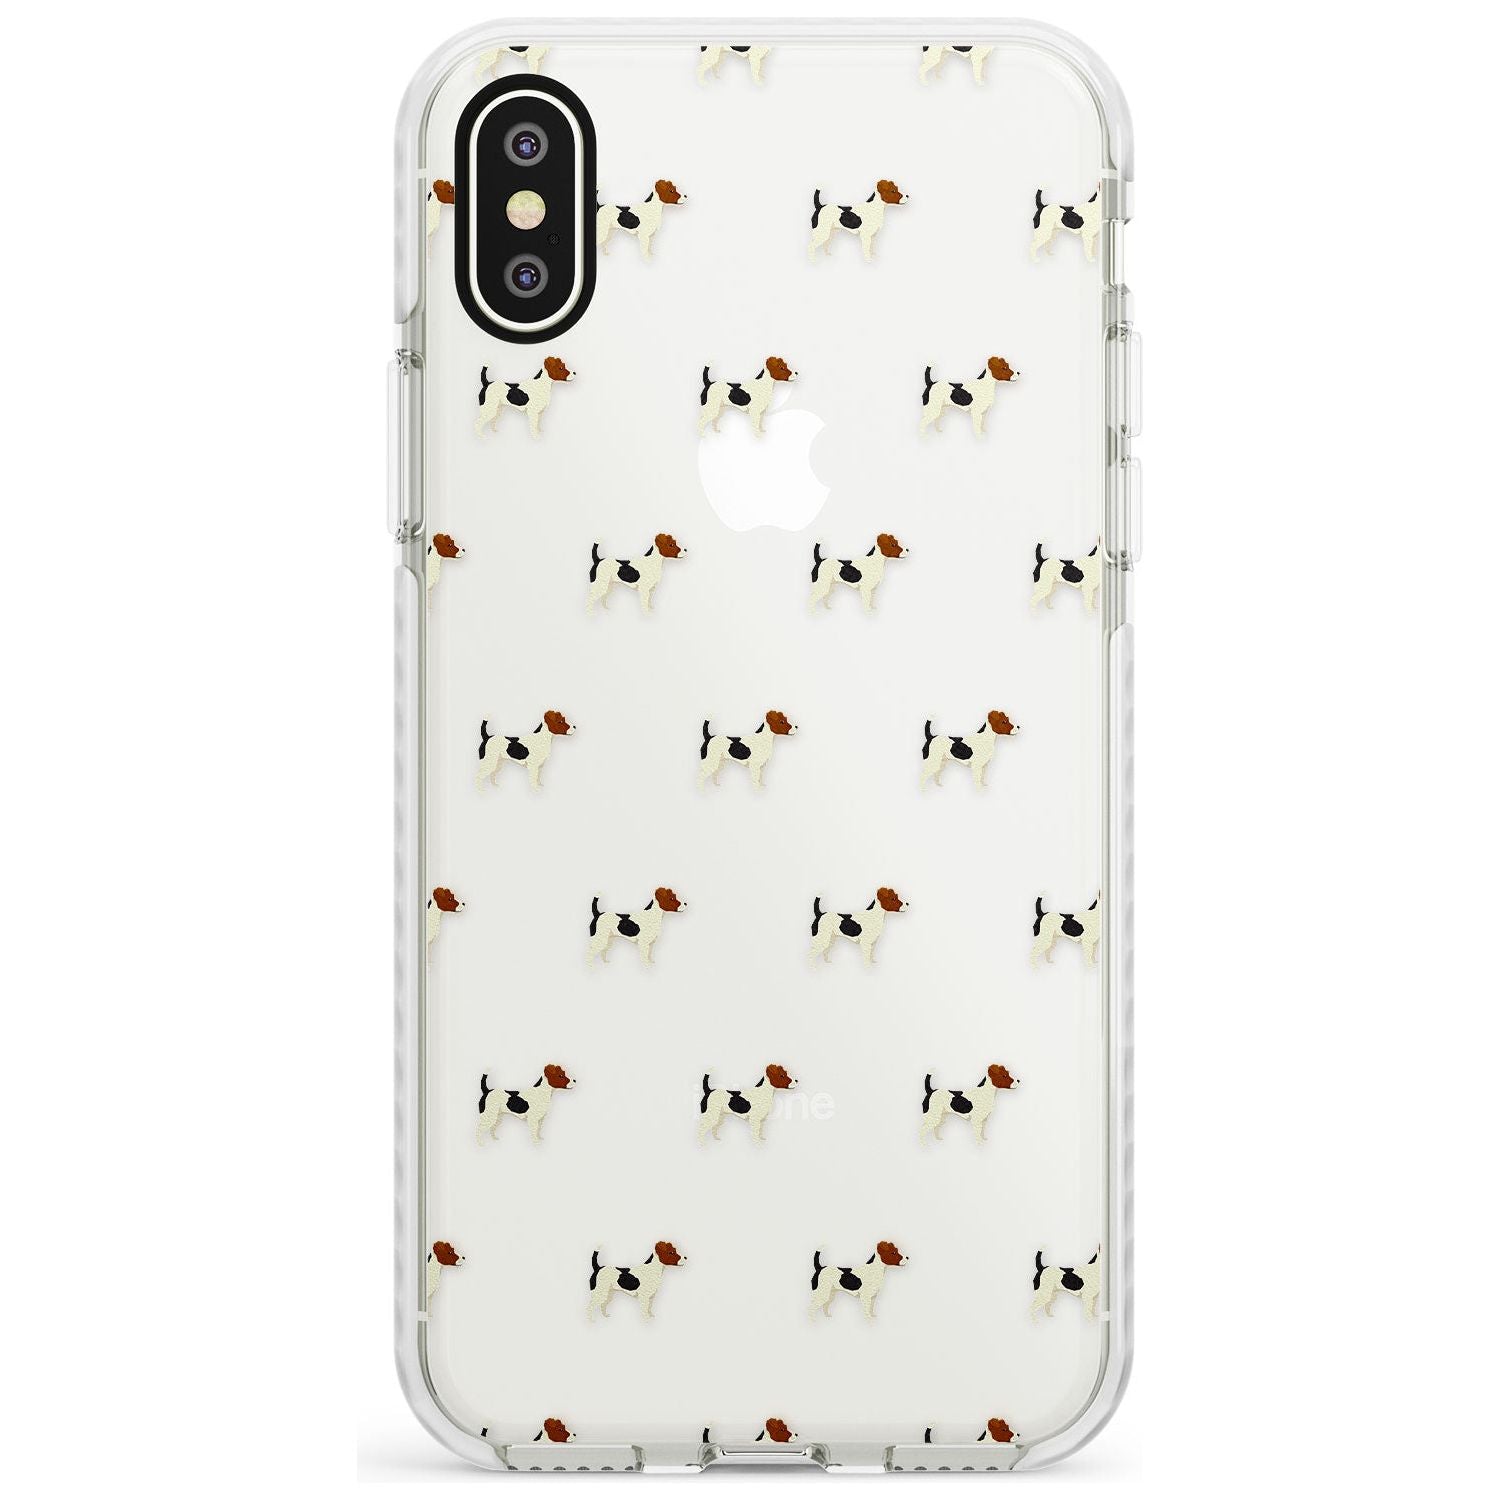 Jack Russell Terrier Dog Pattern Clear Impact Phone Case for iPhone X XS Max XR